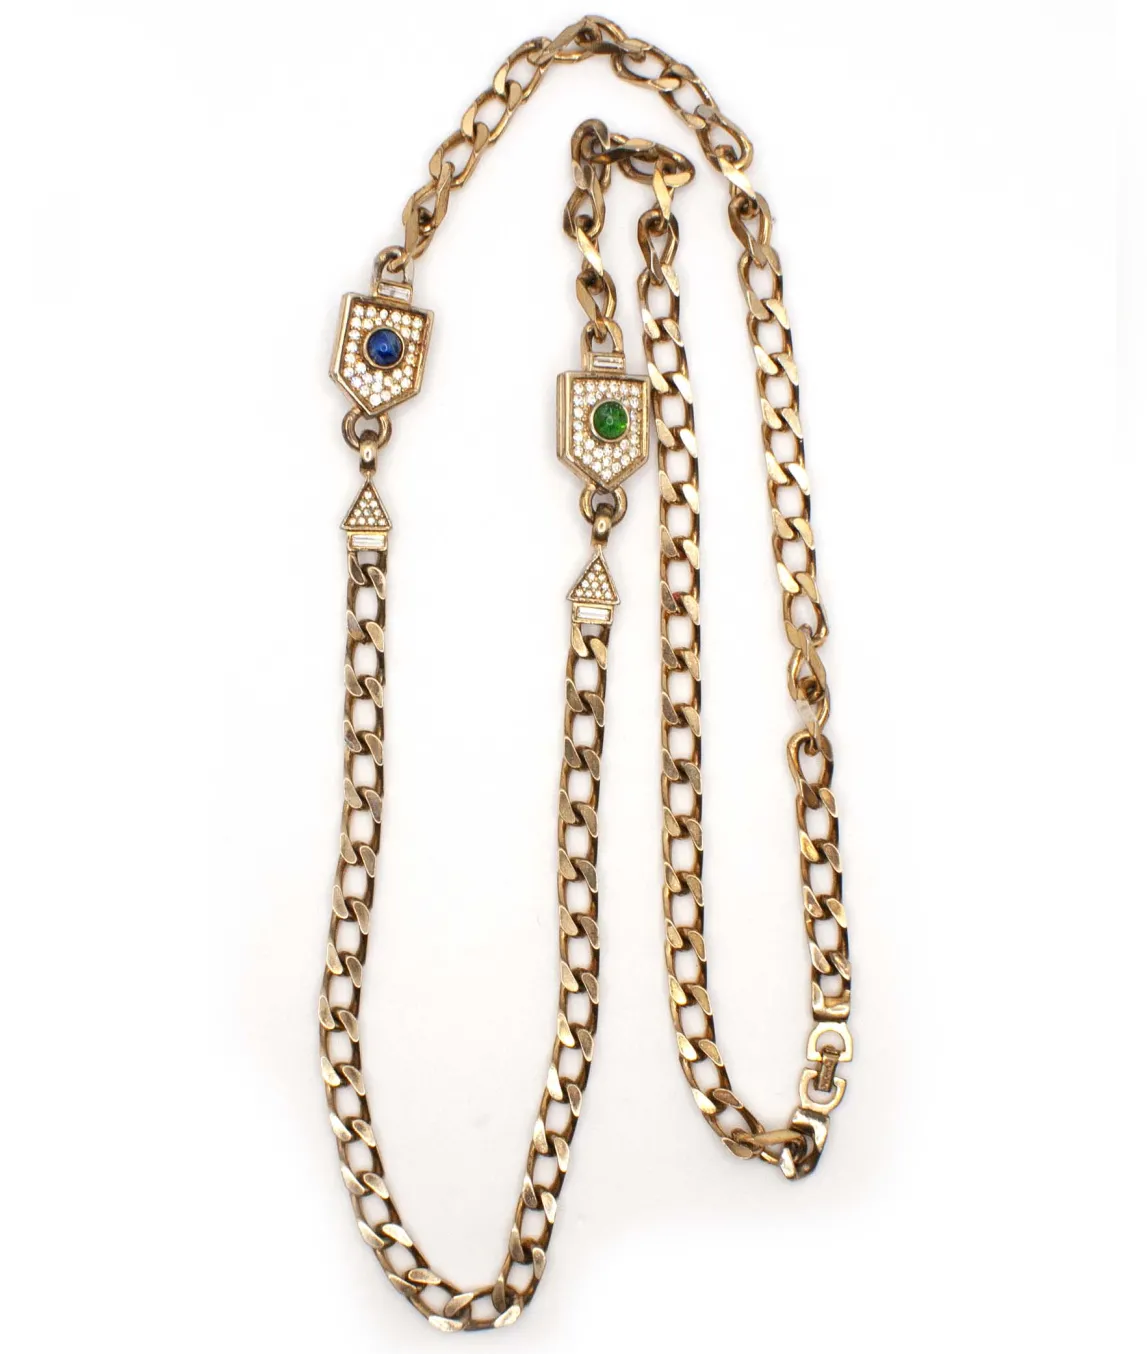 Christian Dior Opera Length Chain with green and blue glass cabochons